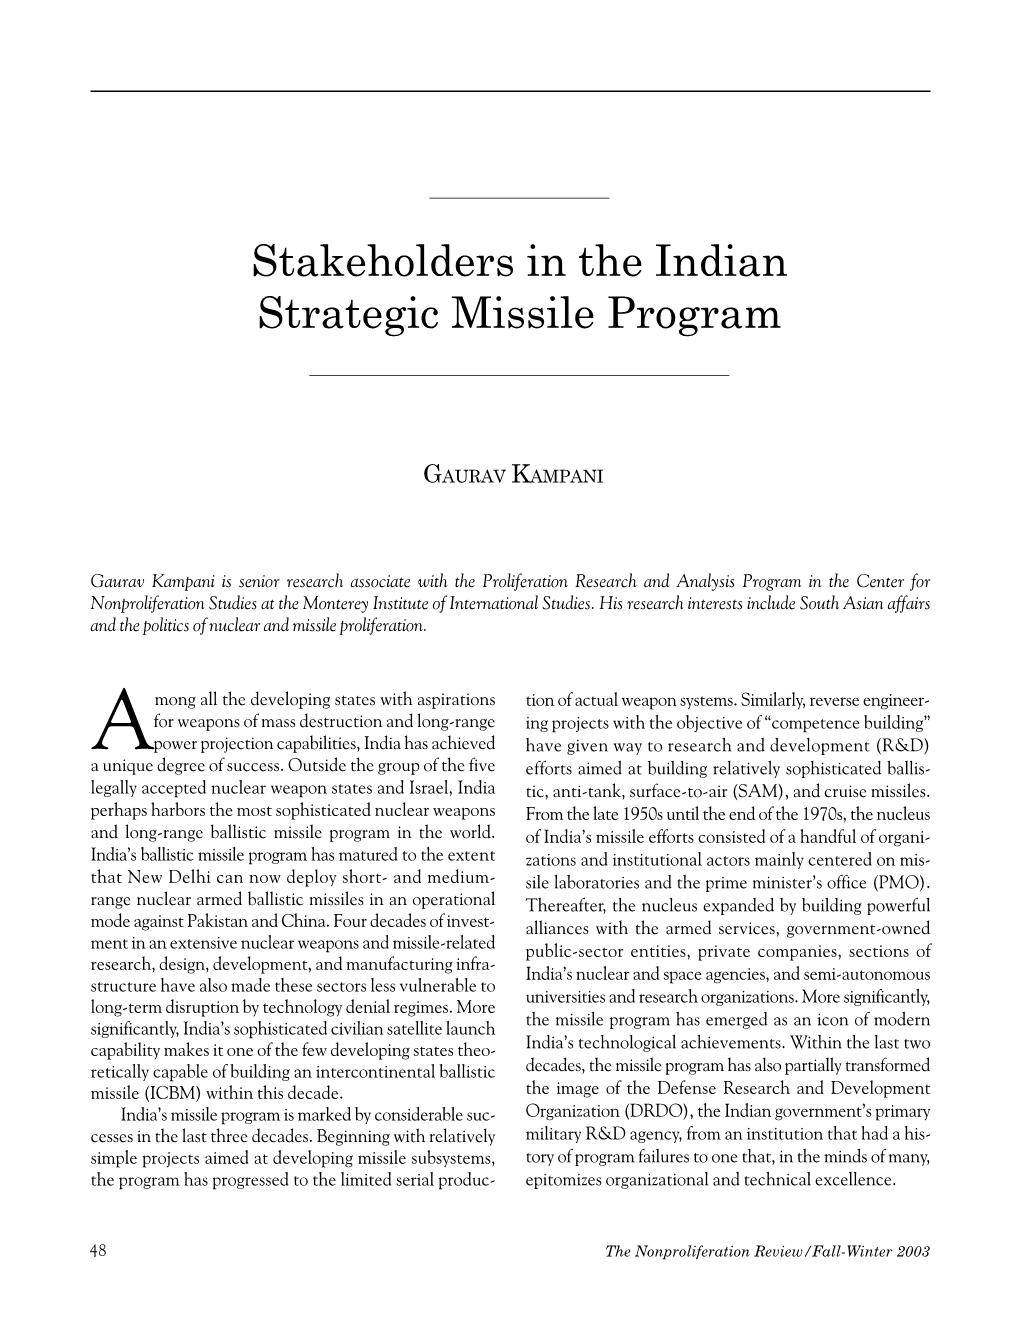 Stakeholders in the Indian Strategic Missile Program